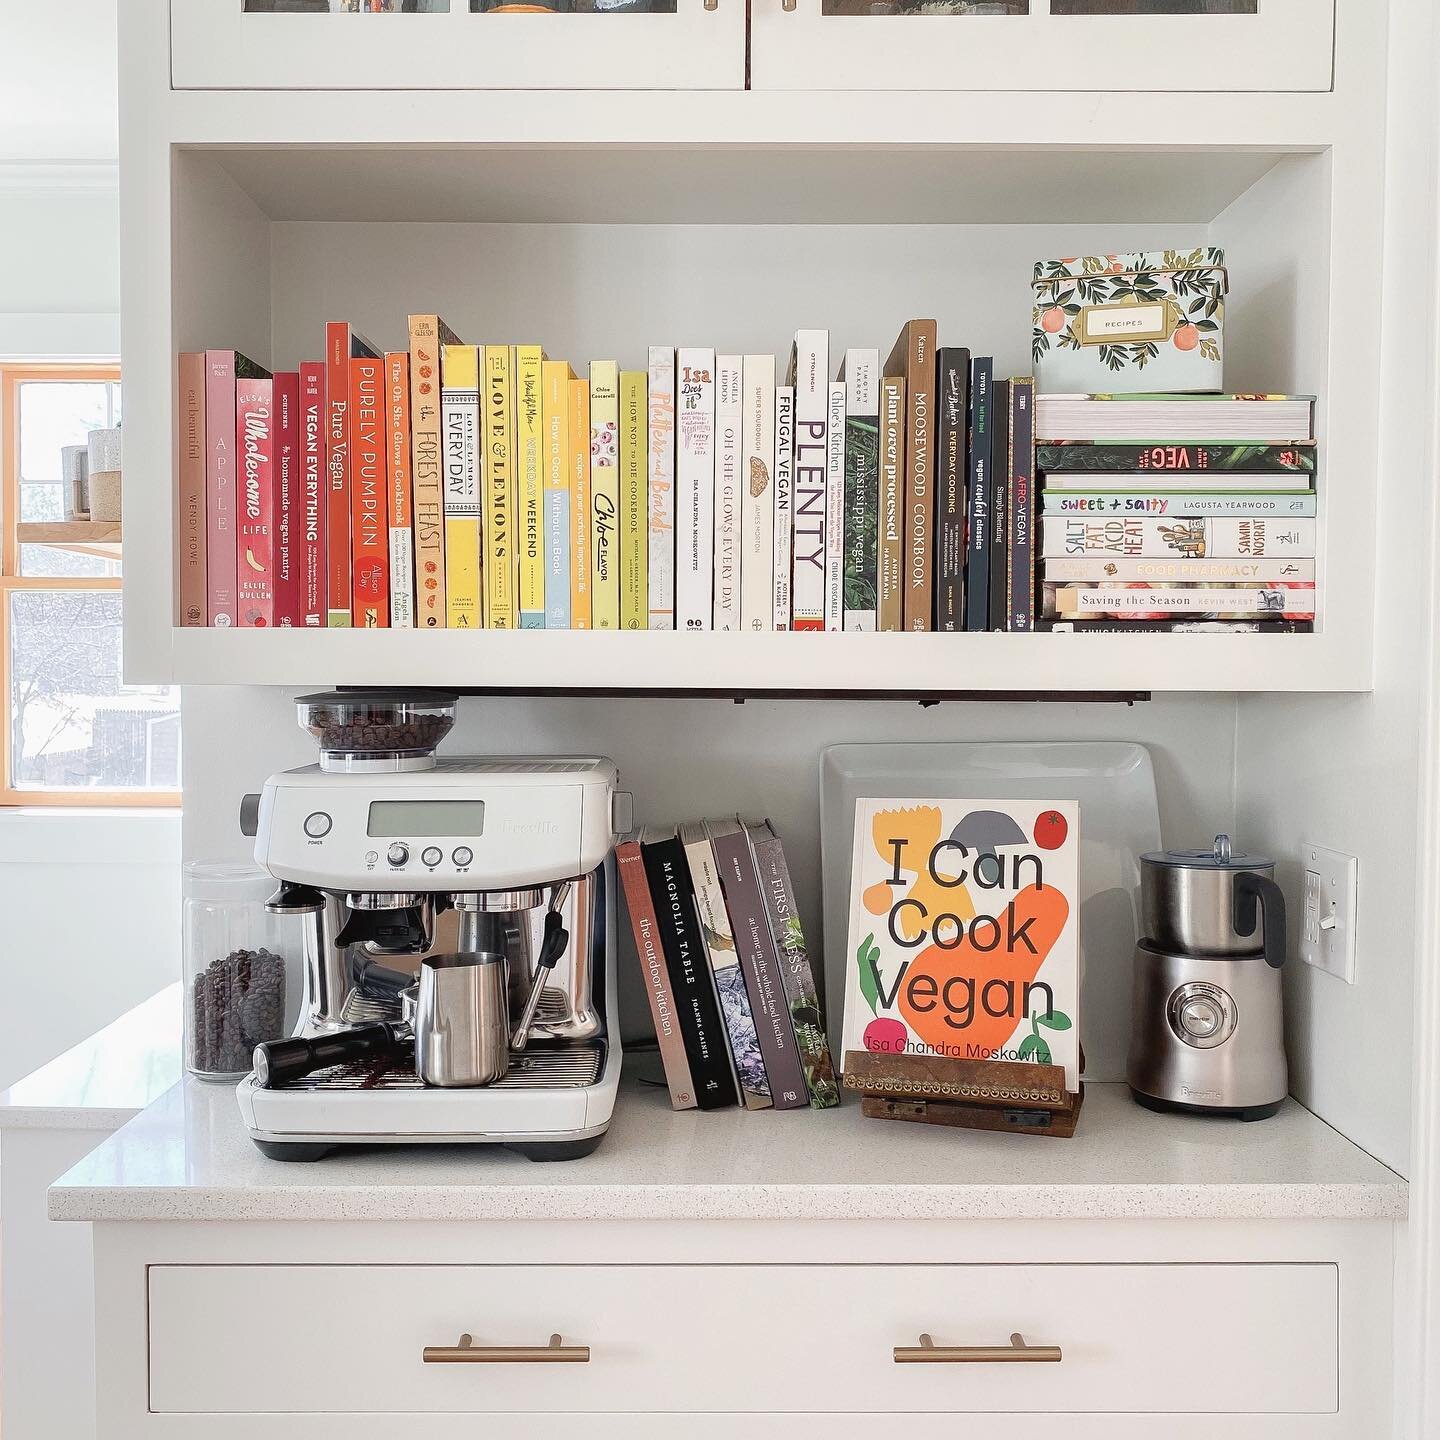 Happy Friday from a little corner of our kitchen that is home to one of my favorite collections&mdash; my cookbooks! While I&rsquo;ll occasionally use a recipe from an online source, I overwhelmingly prefer cookbooks when preparing meals (anyone else